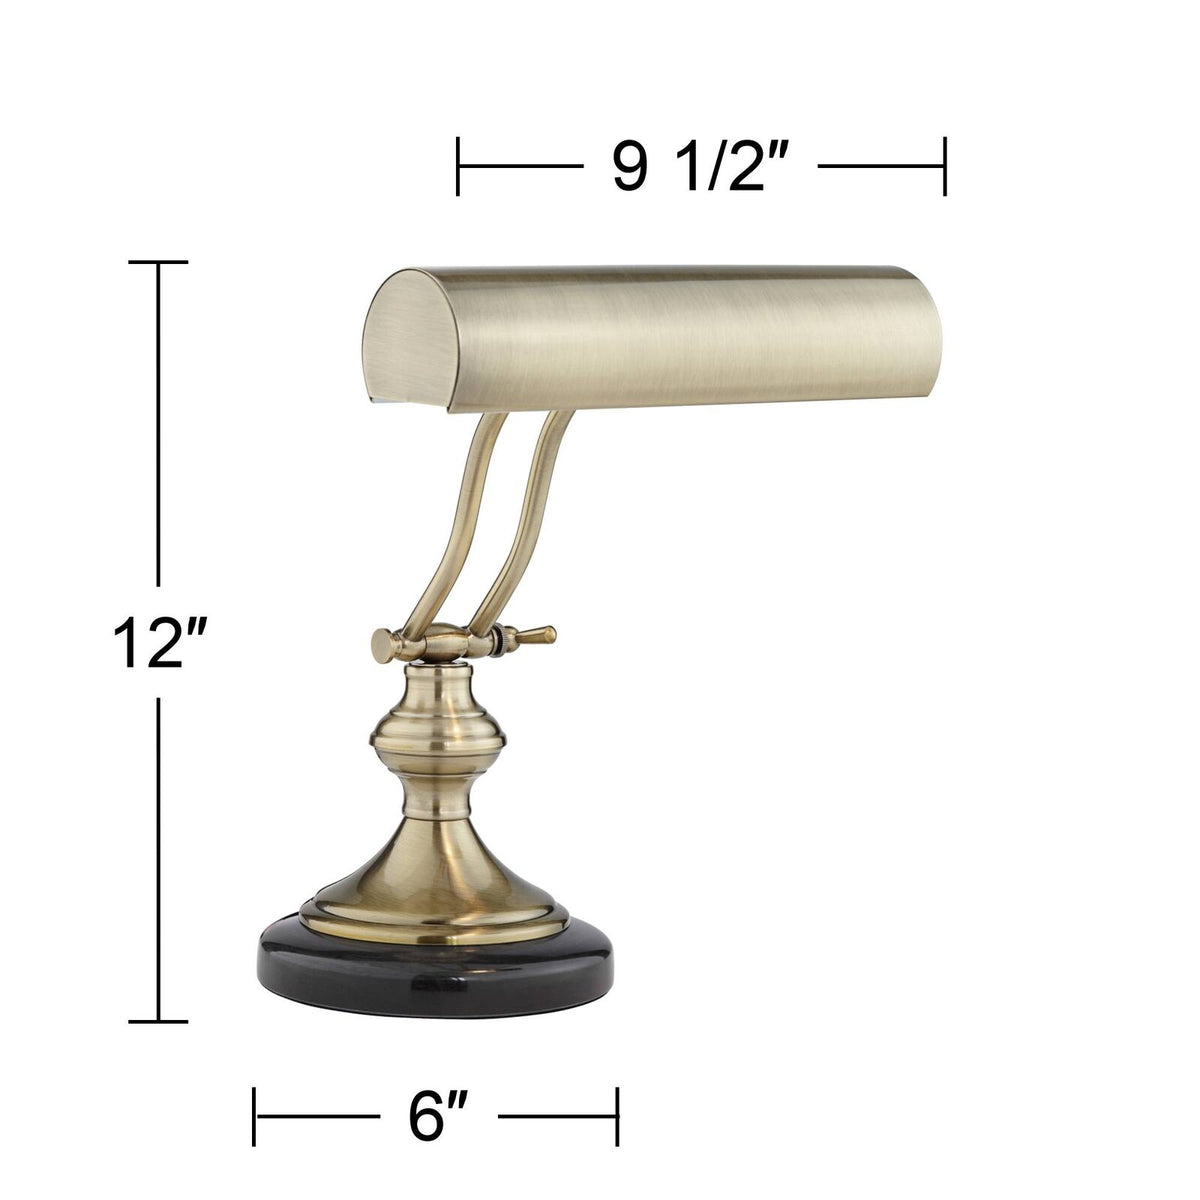 12 Inches High Traditional Piano Style Desk Lamp Antique Brass Finish